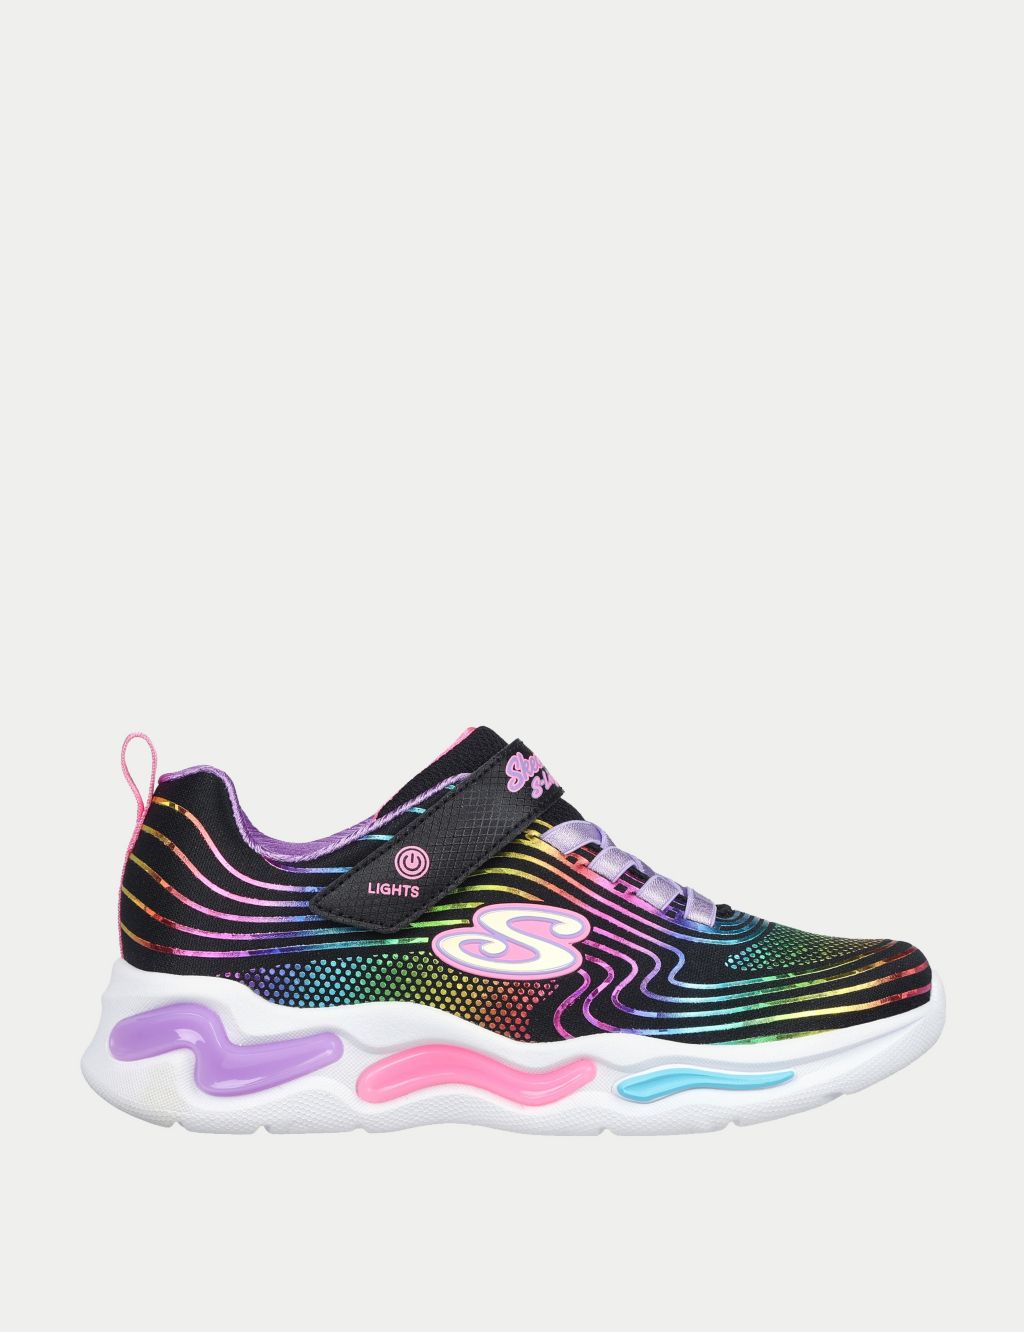 Rainbow Light Up Trainers (9.5 Small - 3 Large)